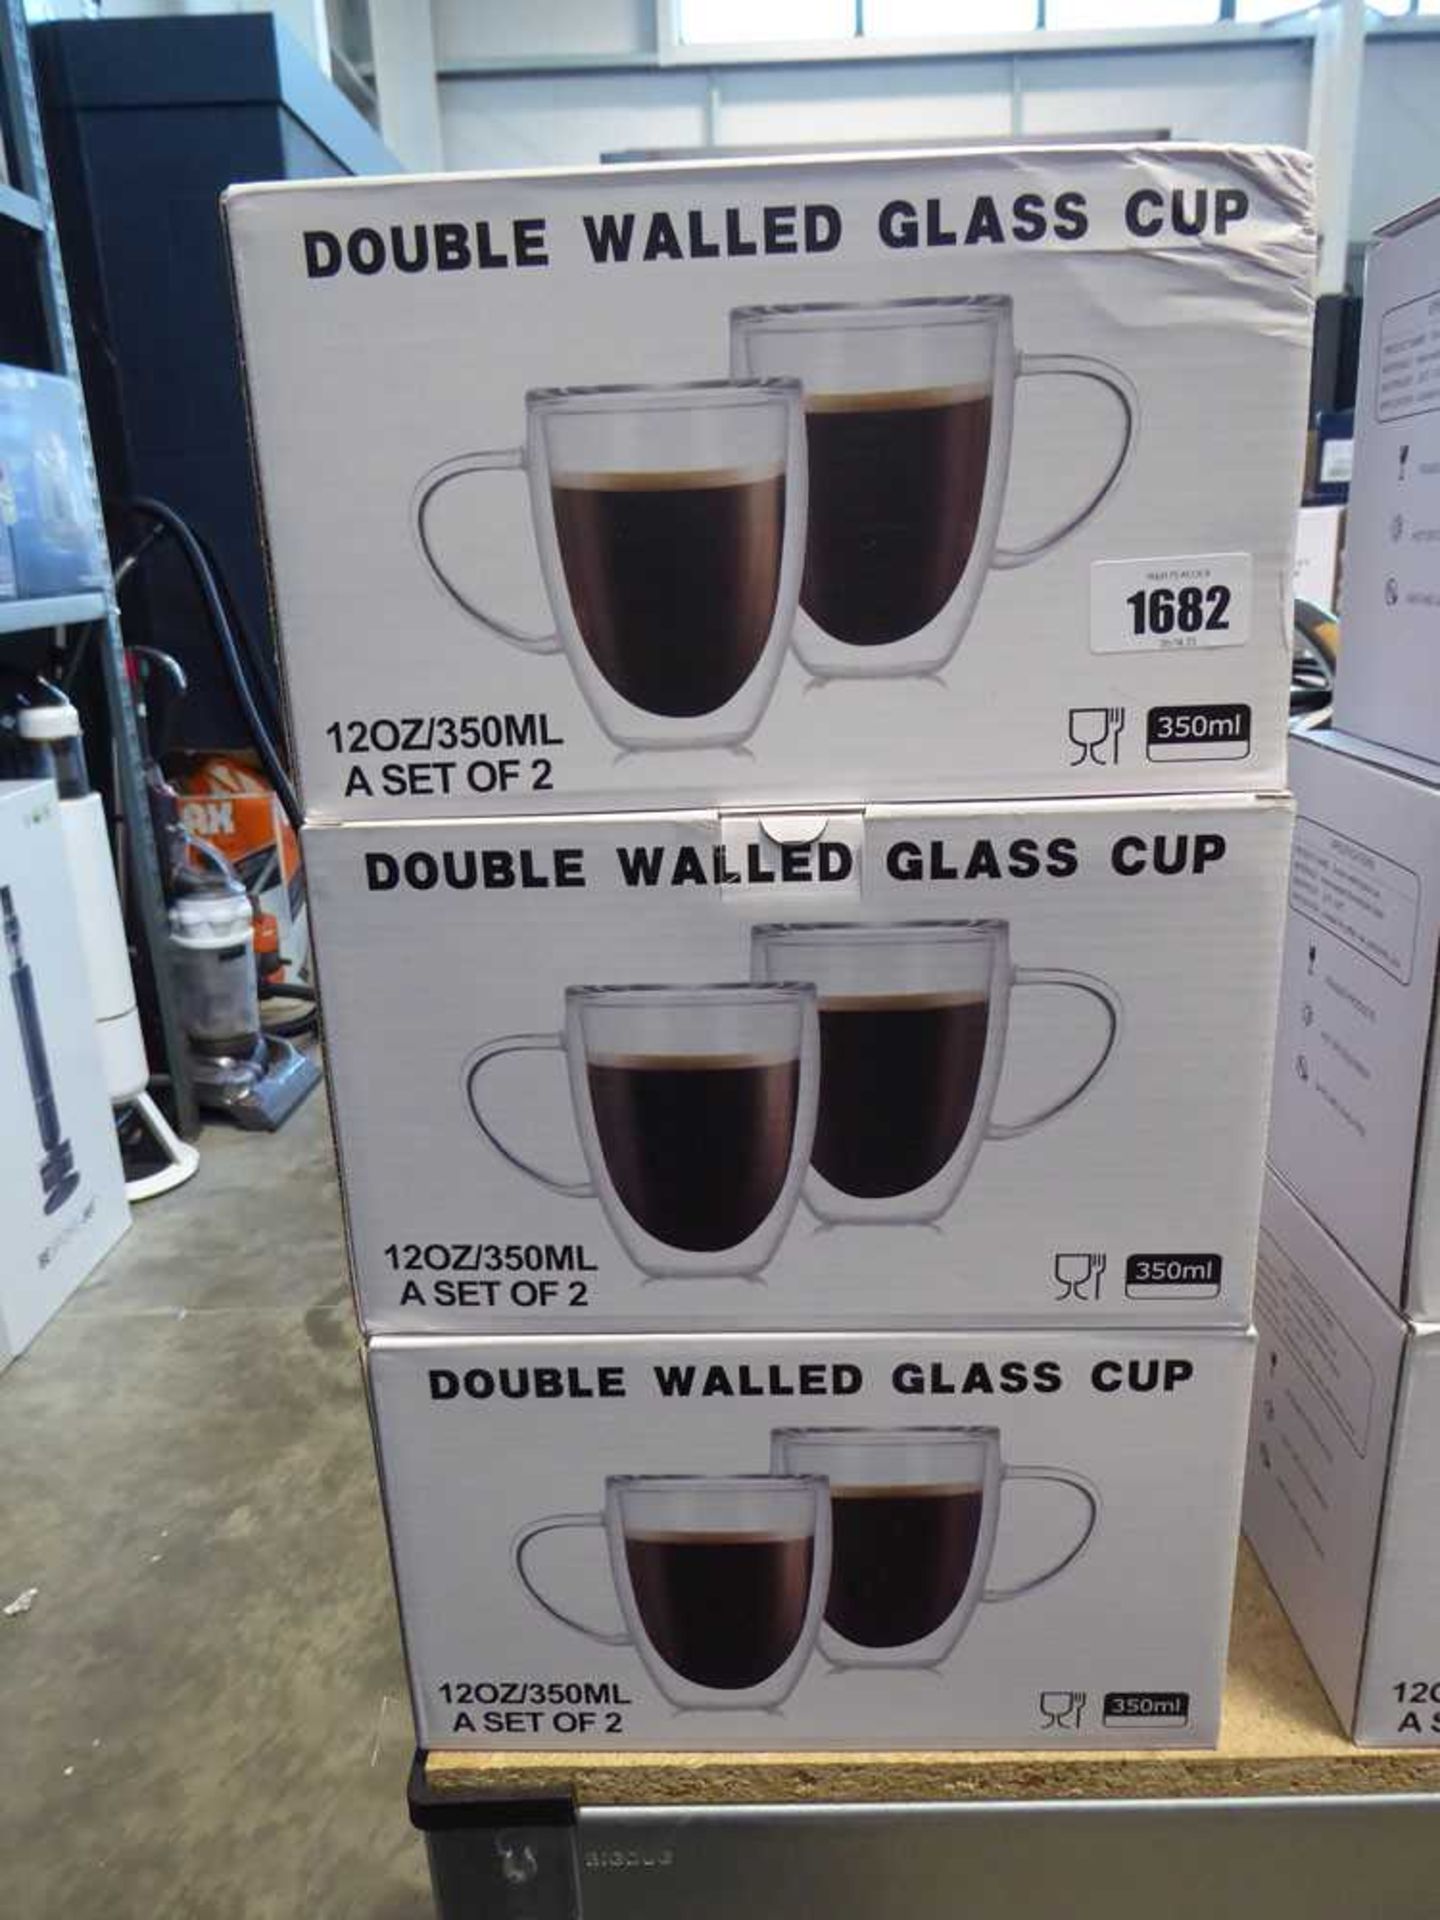 3 sets of 2 double walled glass cups